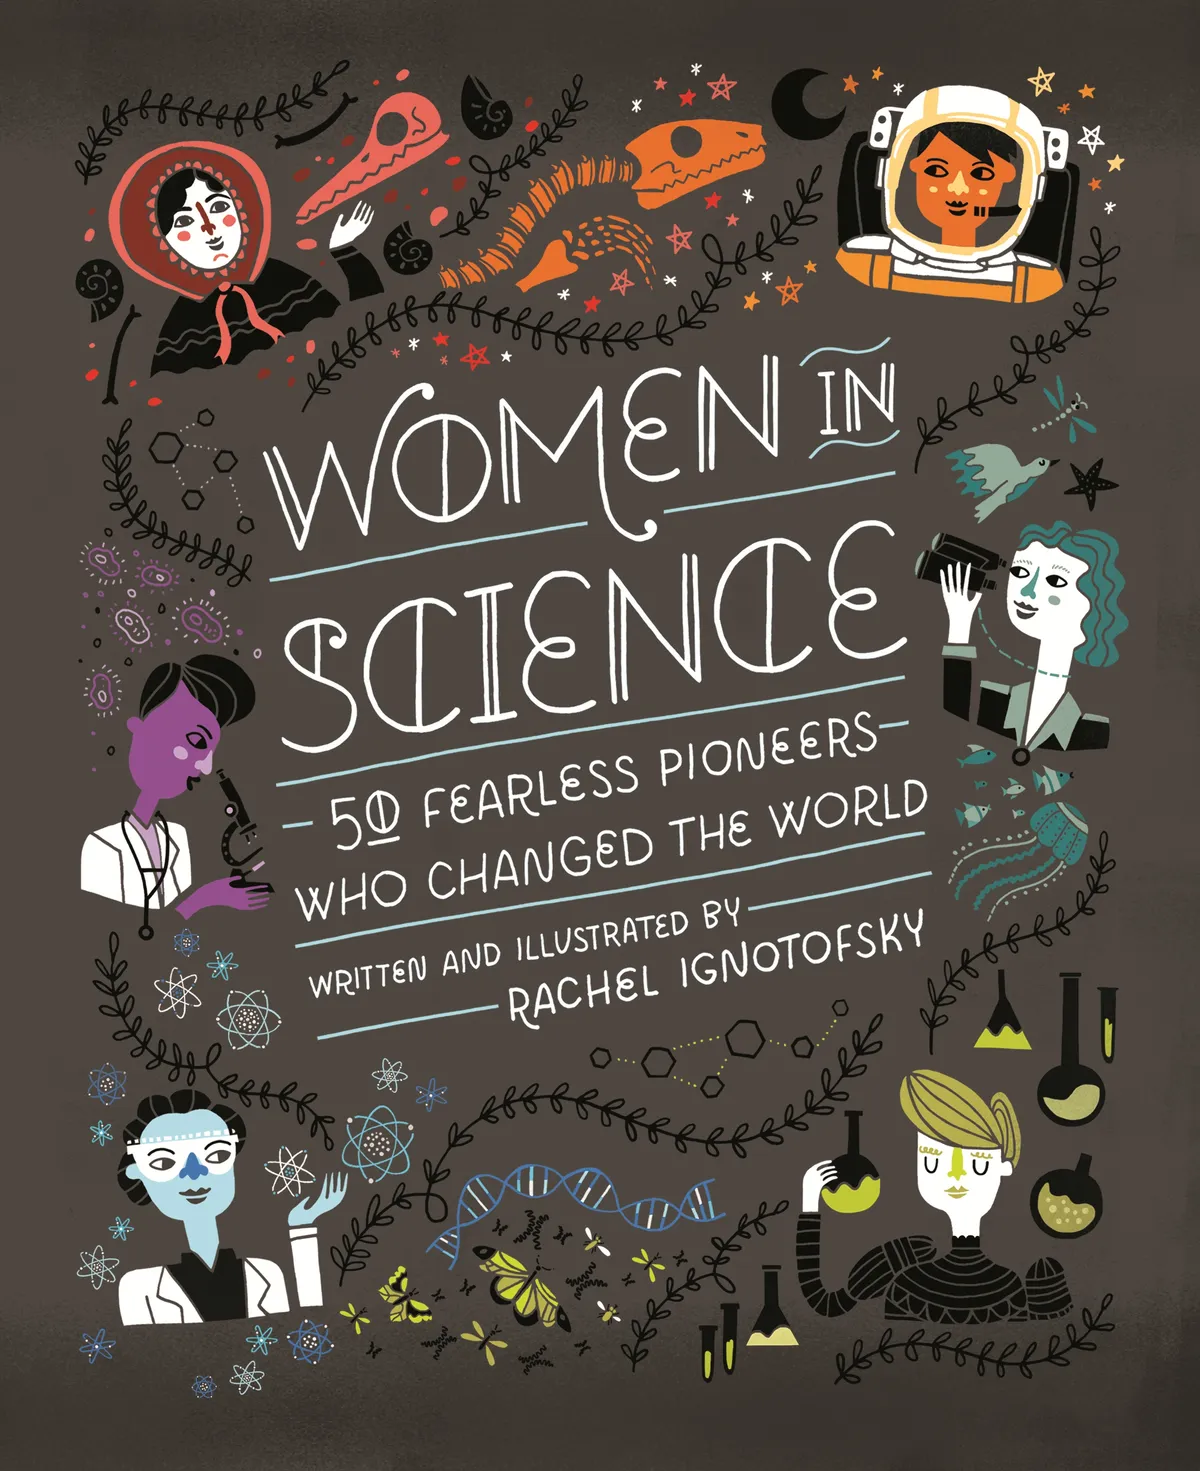 Women in Science: 50 fearless pioneers who changed the world by Rachel Ignotofsky is available now (£12.99, Wren & Rook)